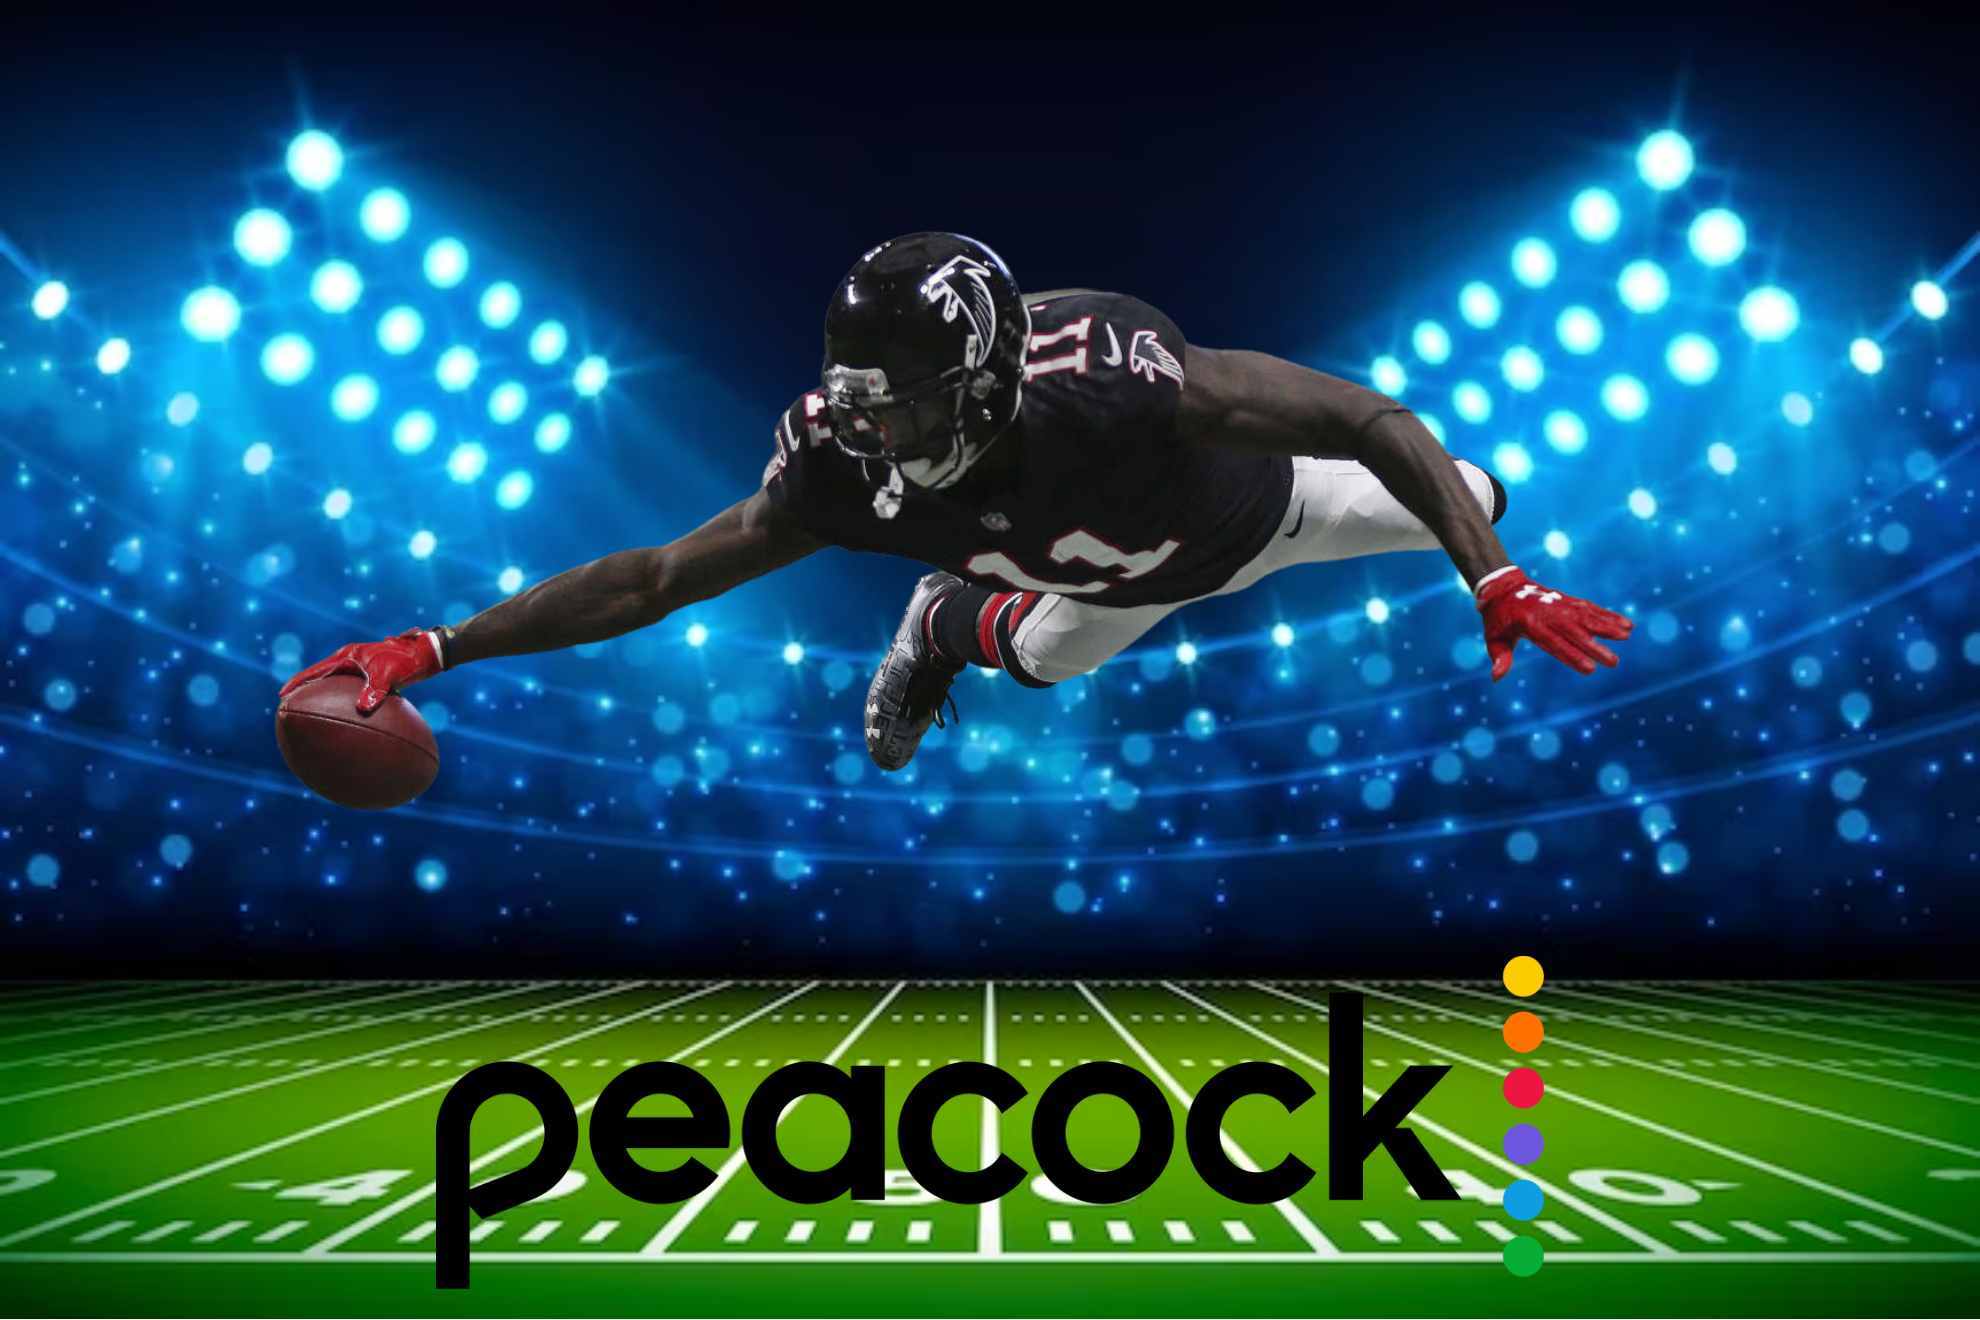 is the bengals game on peacock